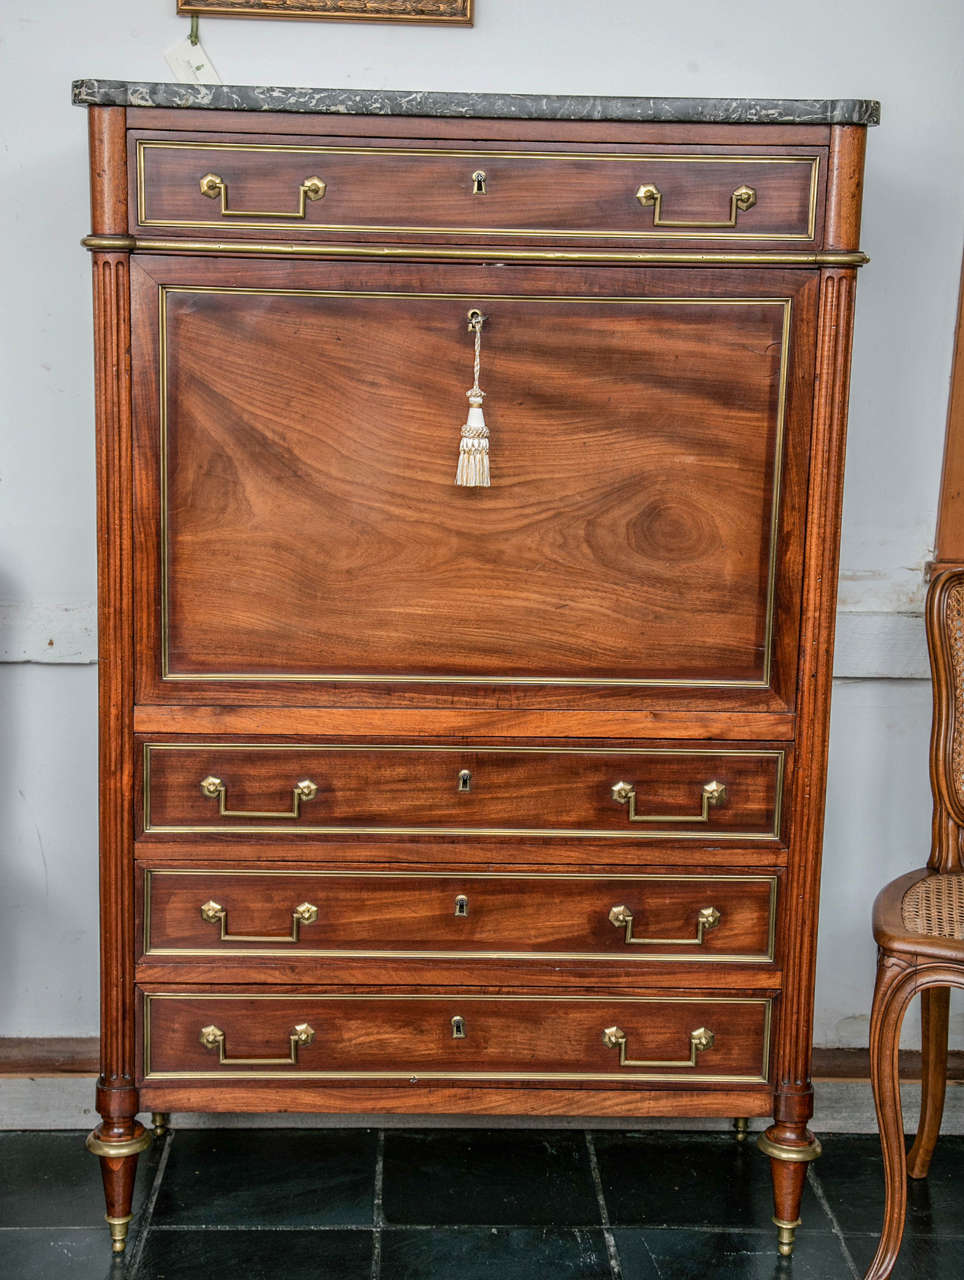 This mahogany abattant has wonderful proportions and it has aged to a warm fruitwood tone. Looking every bit the French desk, it wears a mantel of marble and brass trim to the case, while fluted columns flank the case and lead down to turned feet.